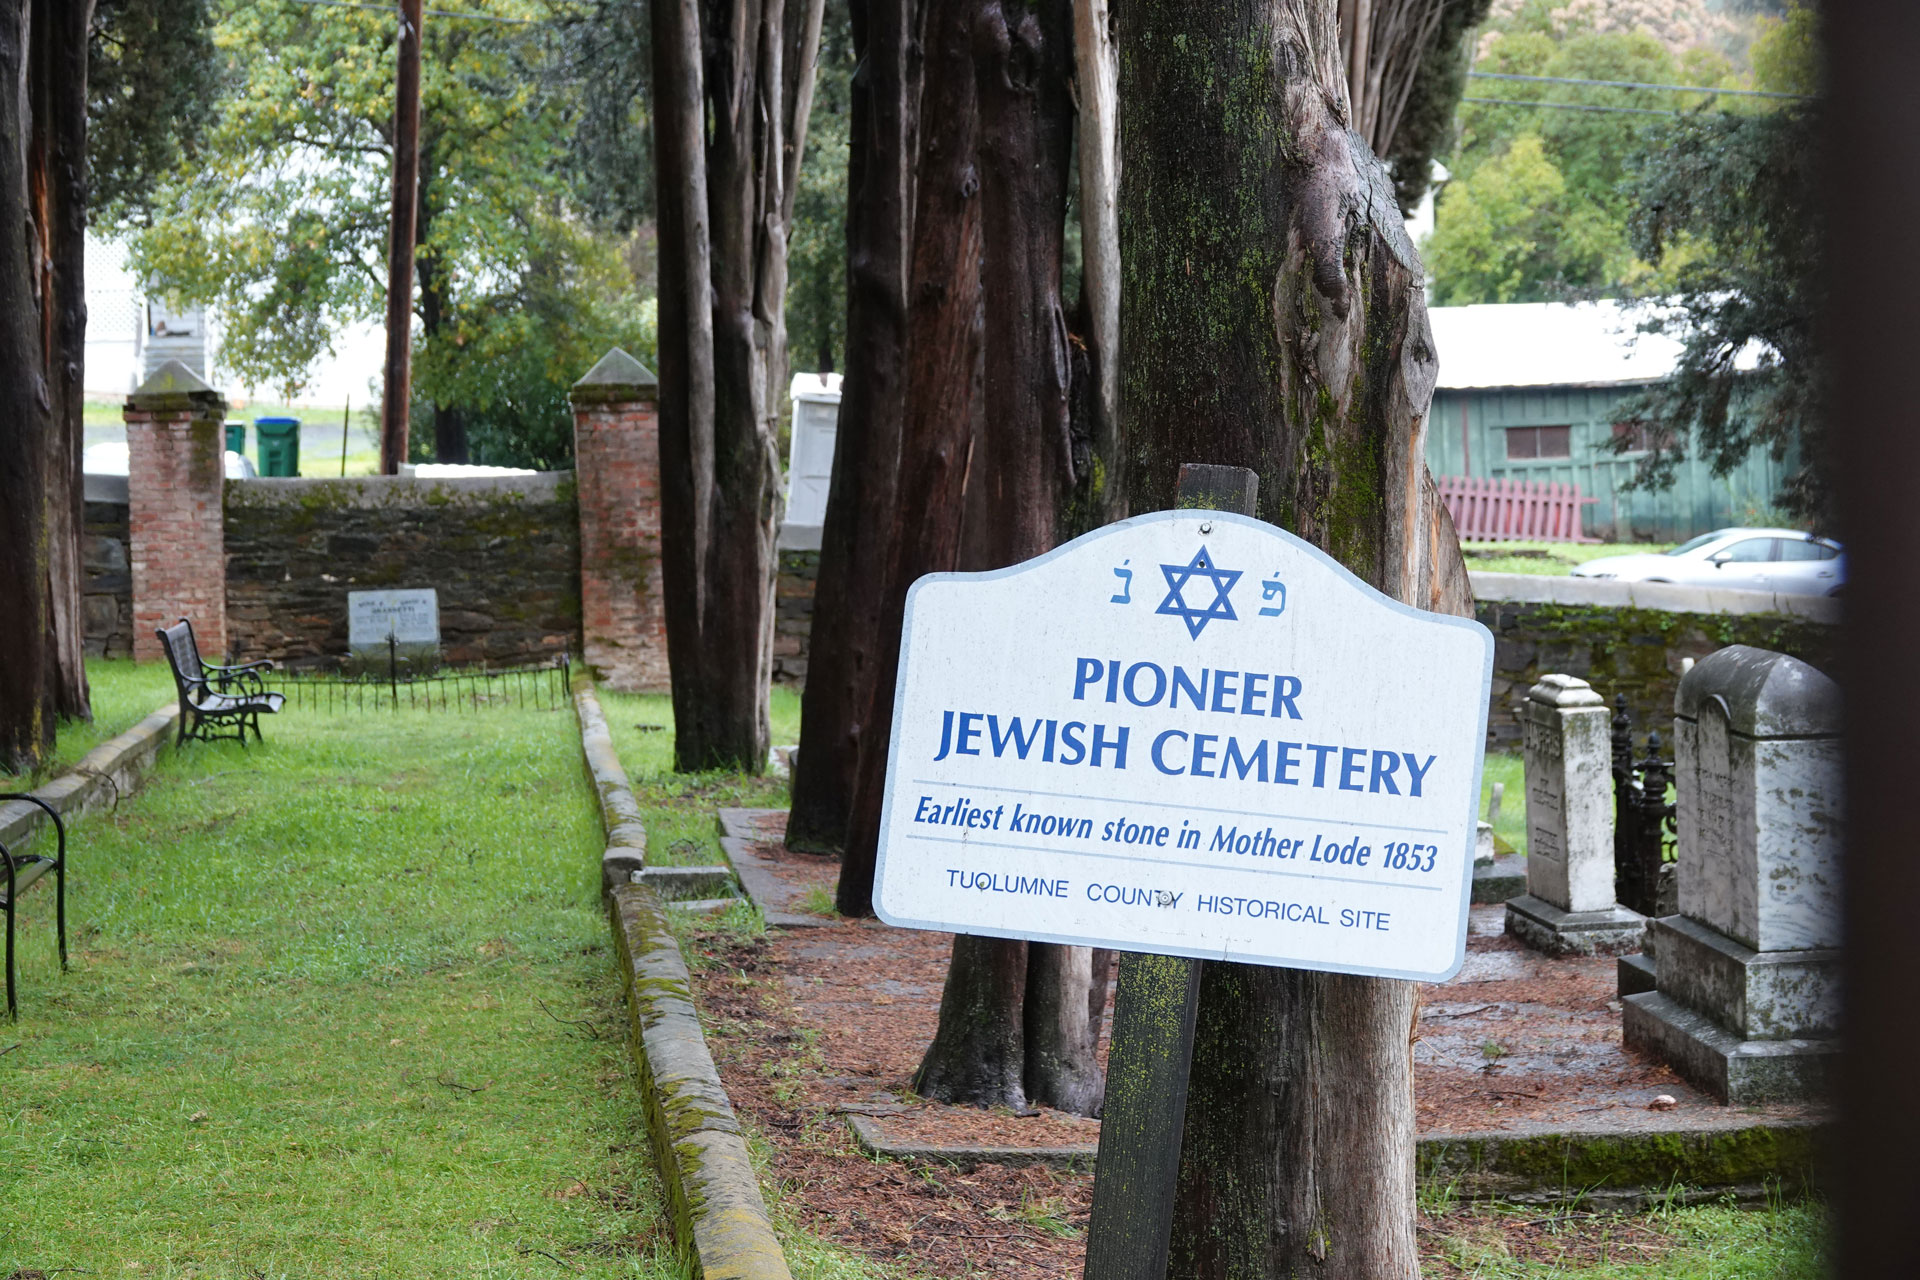 sign reading 'Pioneer Jewish Cemetery' hangs from tree with green grass and cemetery visible in background